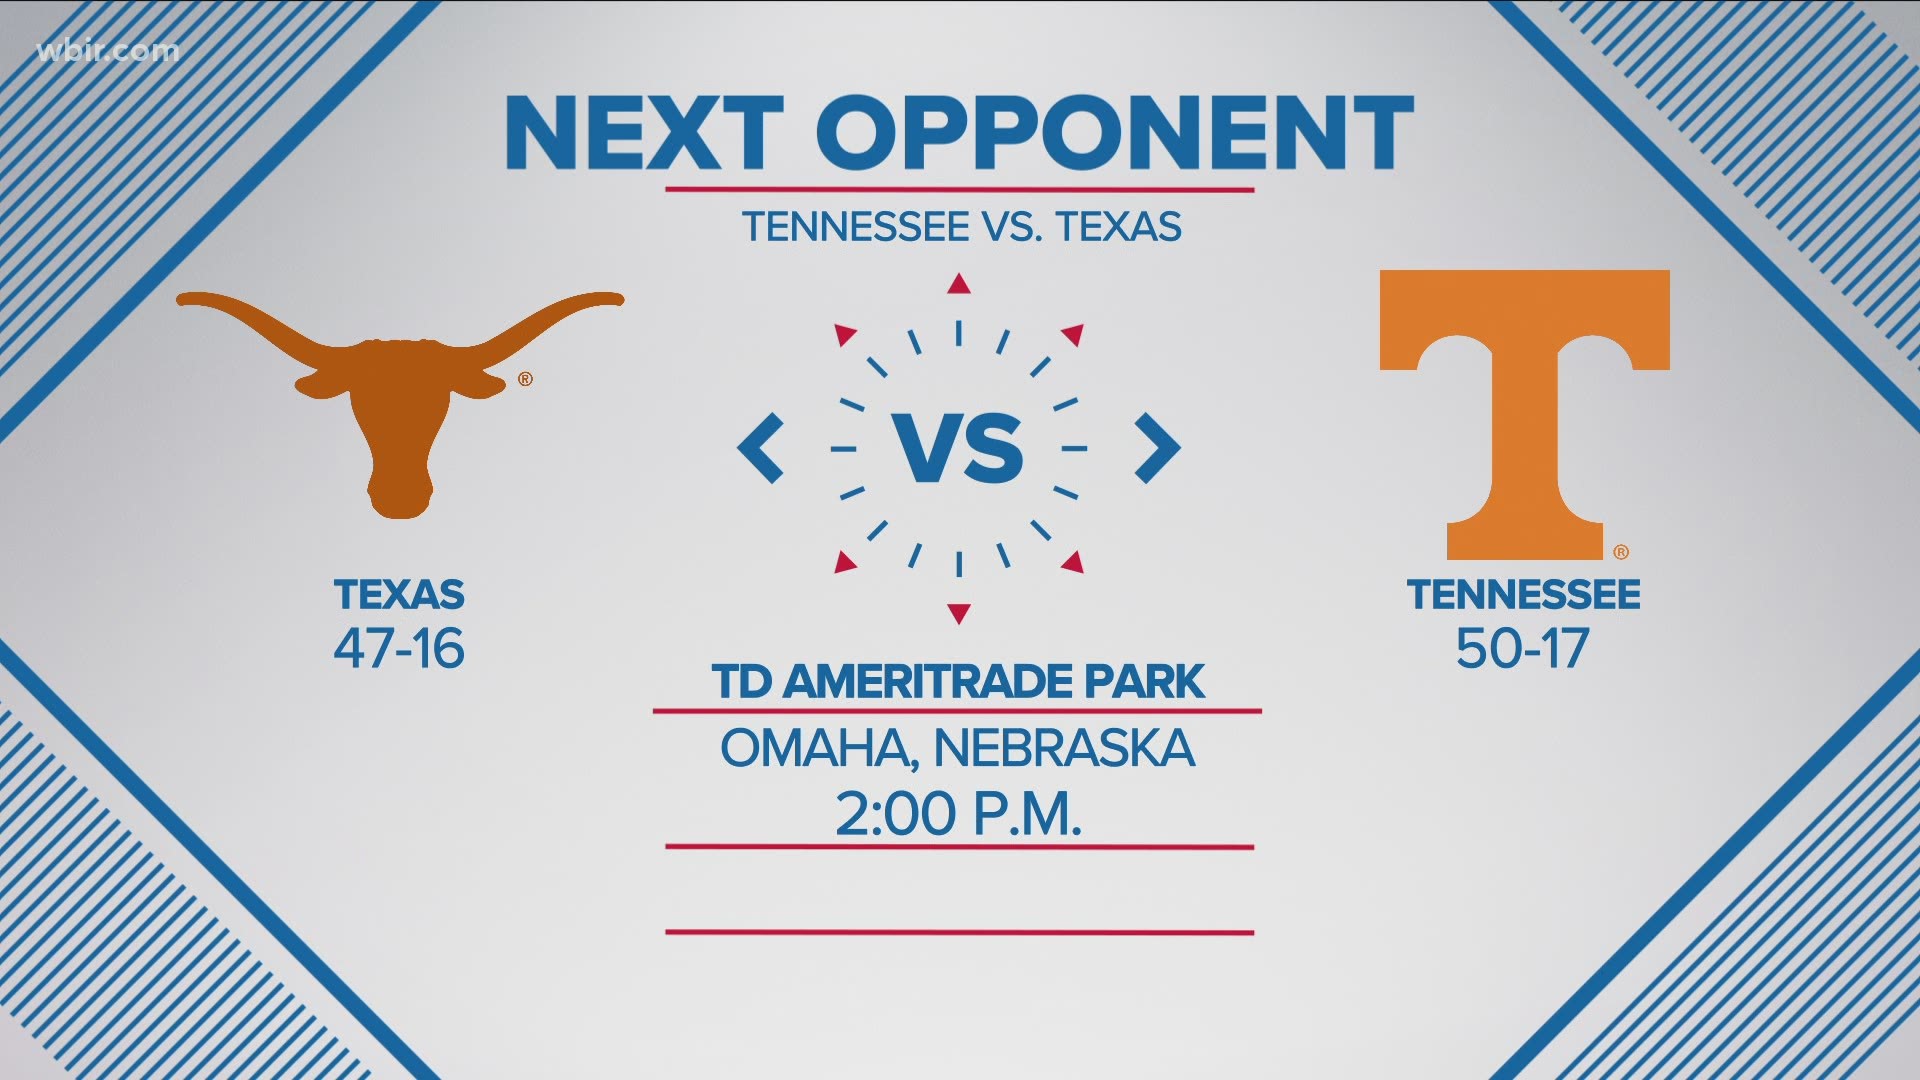 The Baseball Vols will be back in action this afternoon and their opponent, while not a familiar one, has a few things in common.